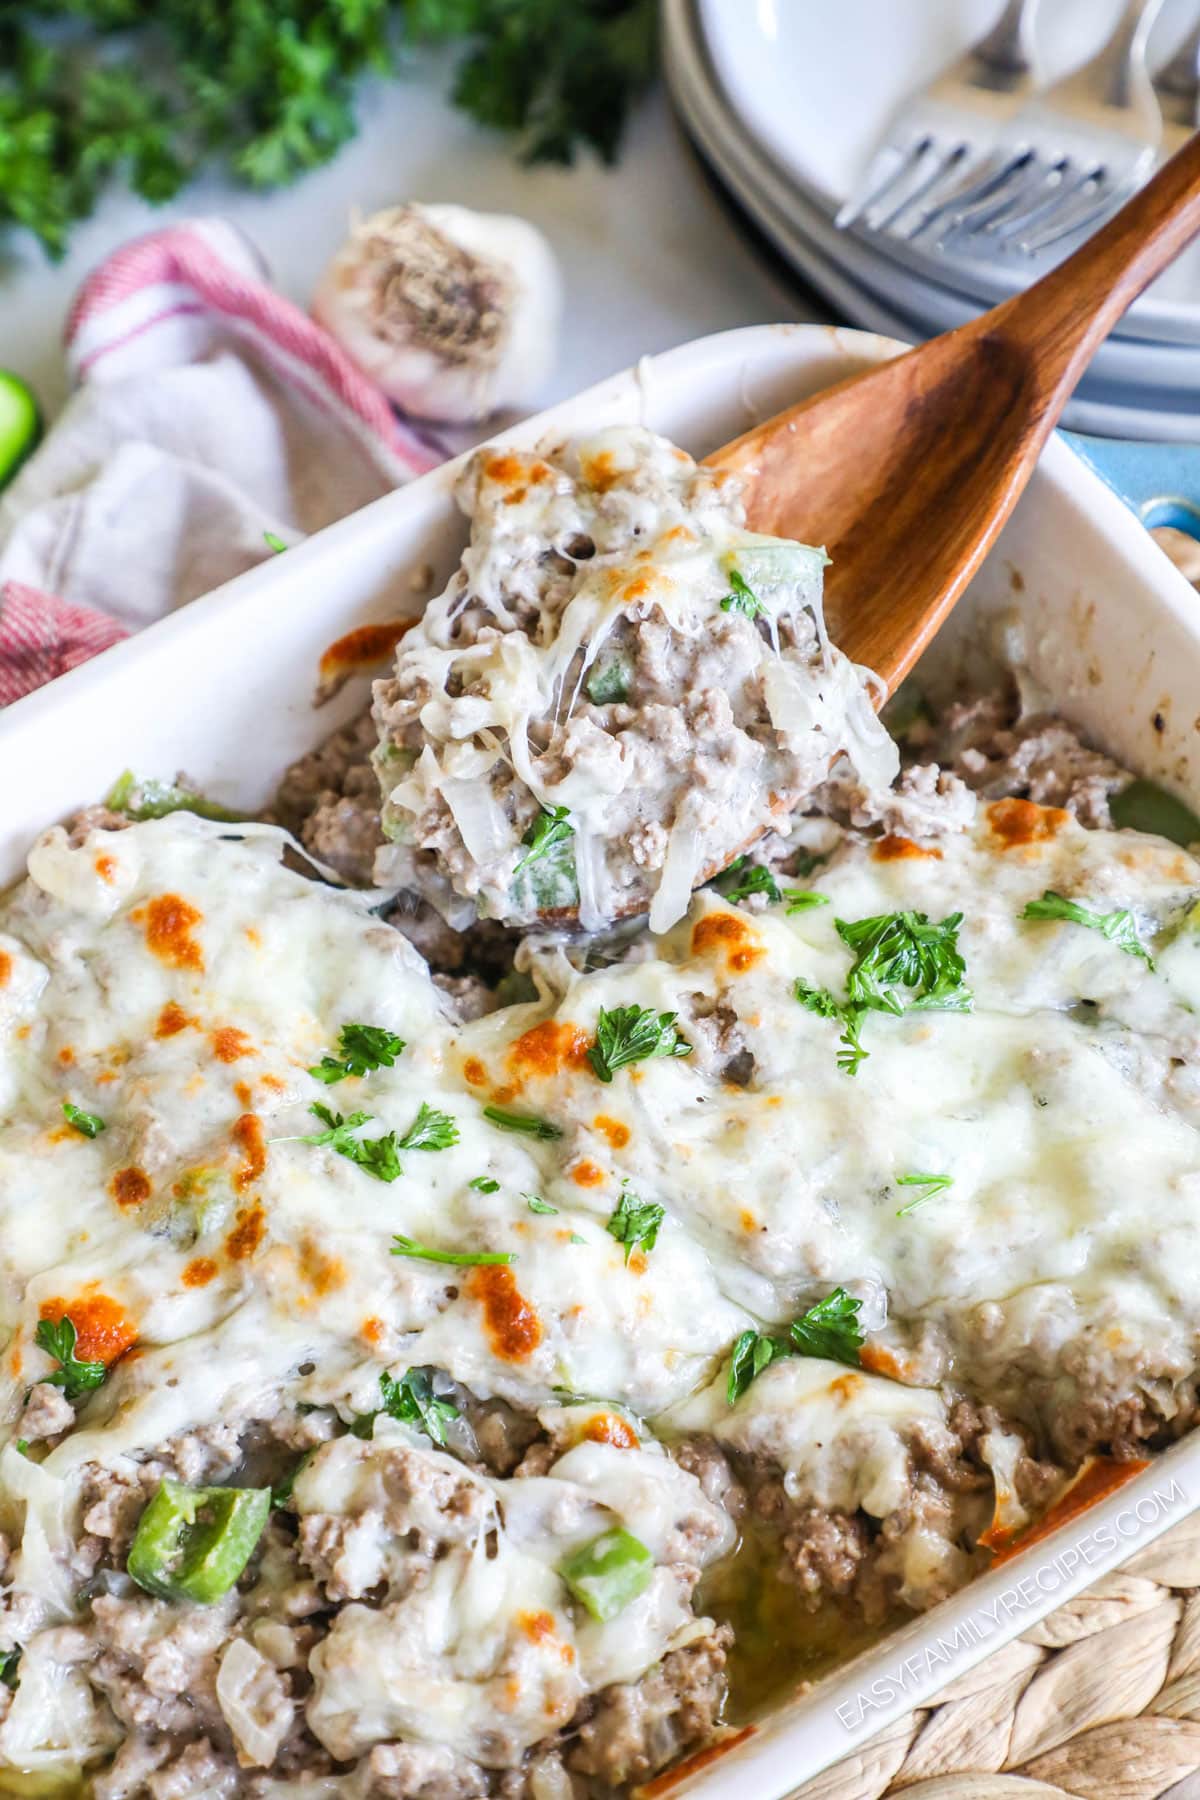 Casserole Dish filled with Philly Cheesesteak Casserole